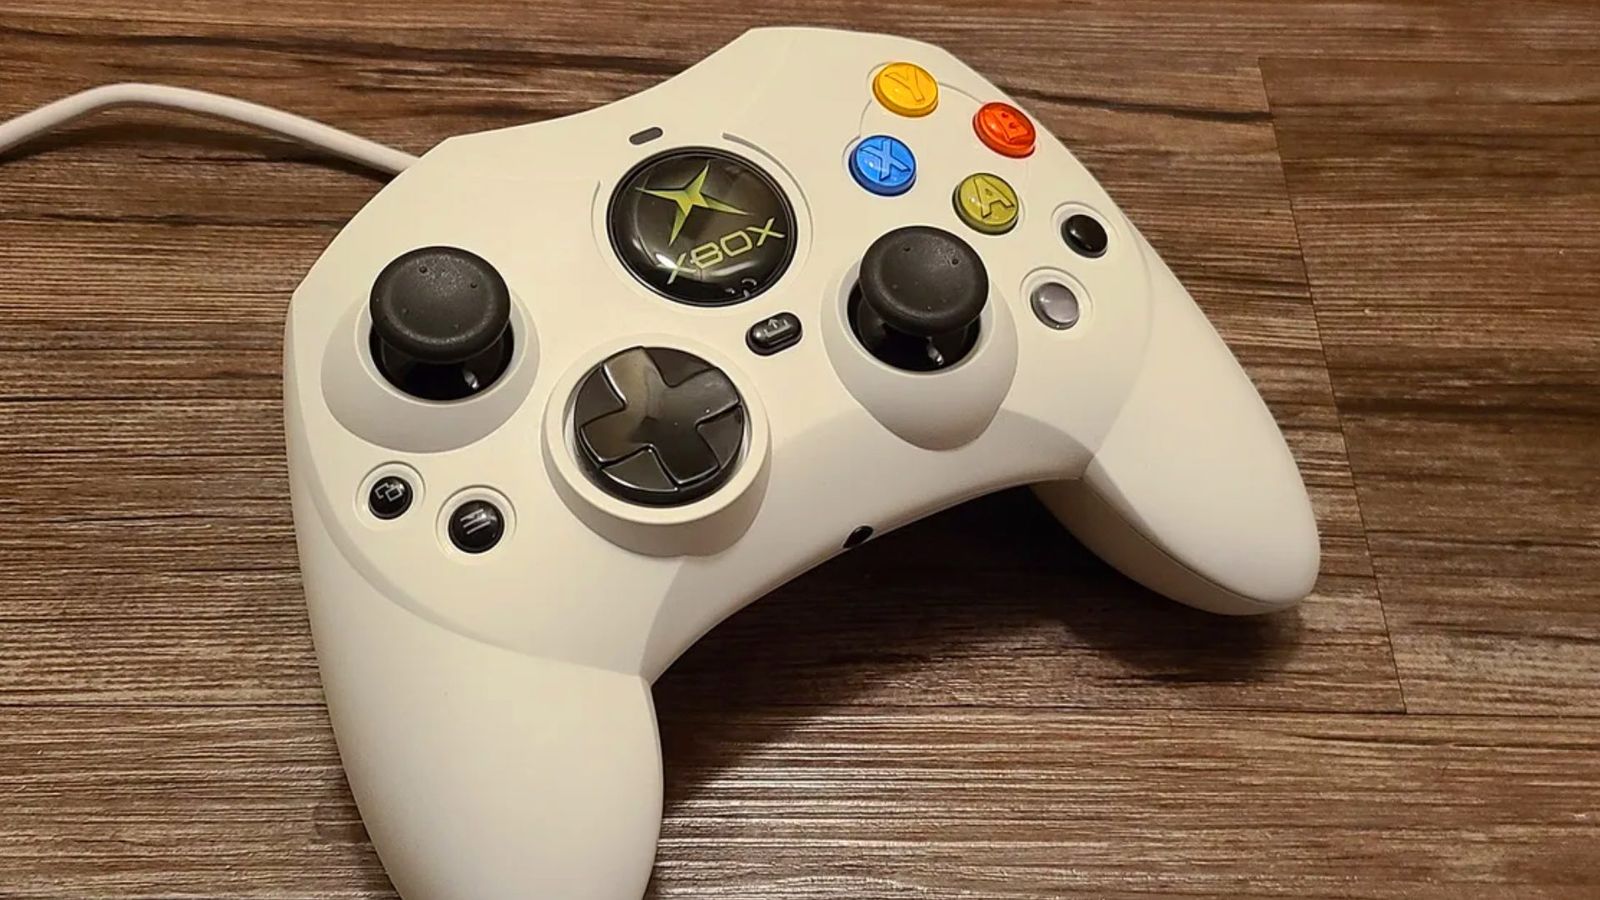 The Hyperkin Duchess Original Xbox S controller in a white skin on a wooden table 